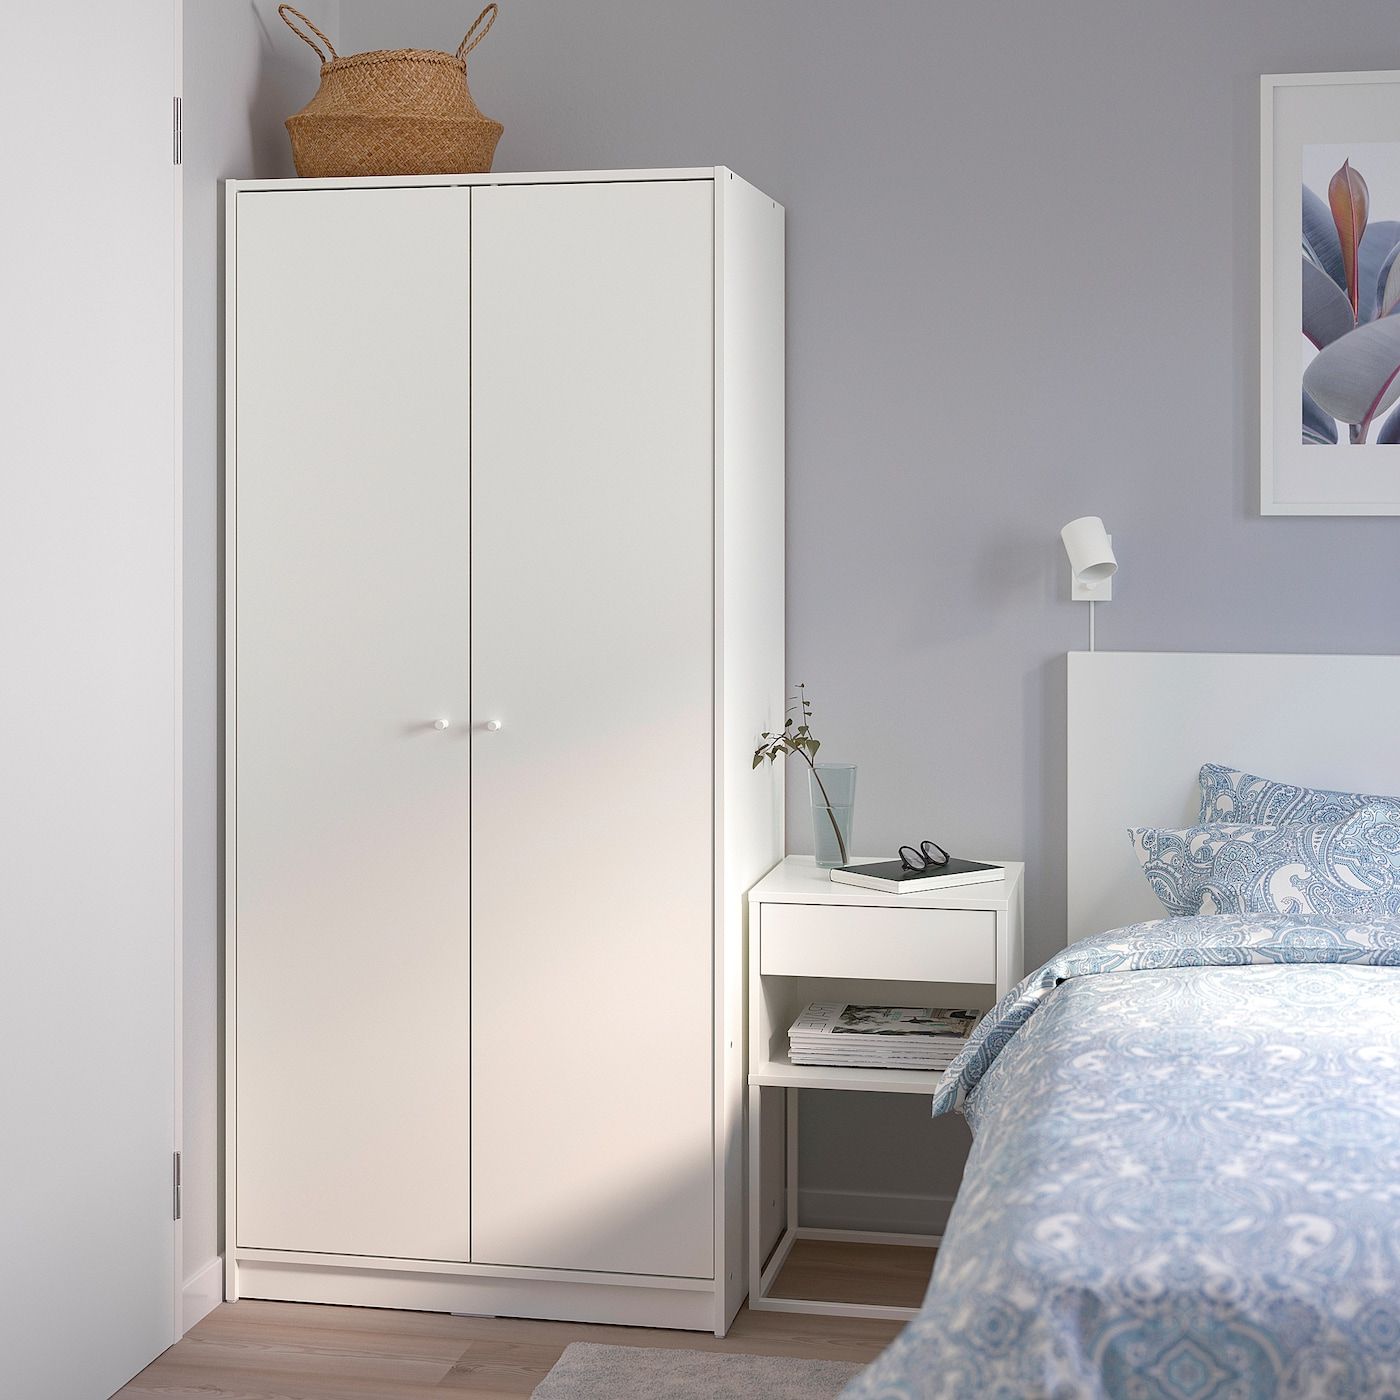 Kleppstad Wardrobe With 2 Doors, White, 311/4x691/4" – Ikea Within Two Door White Wardrobes (View 2 of 20)